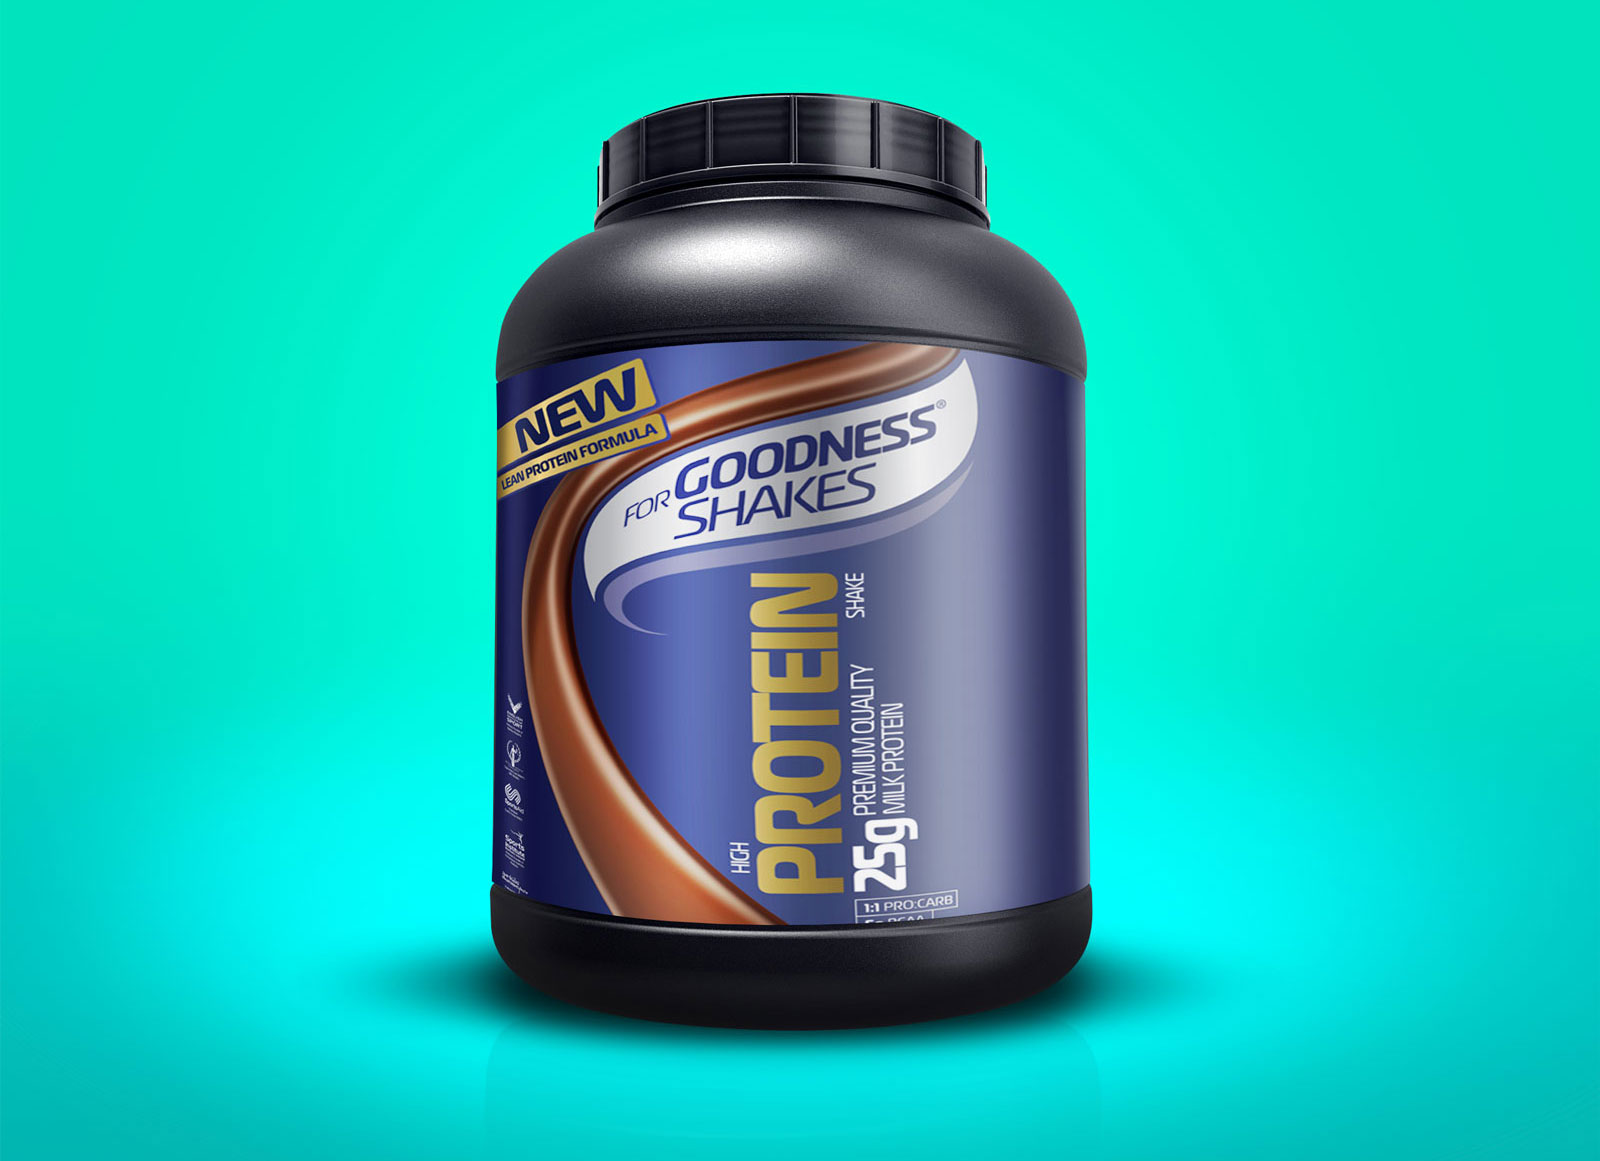 Powder Supplement Container Mockup